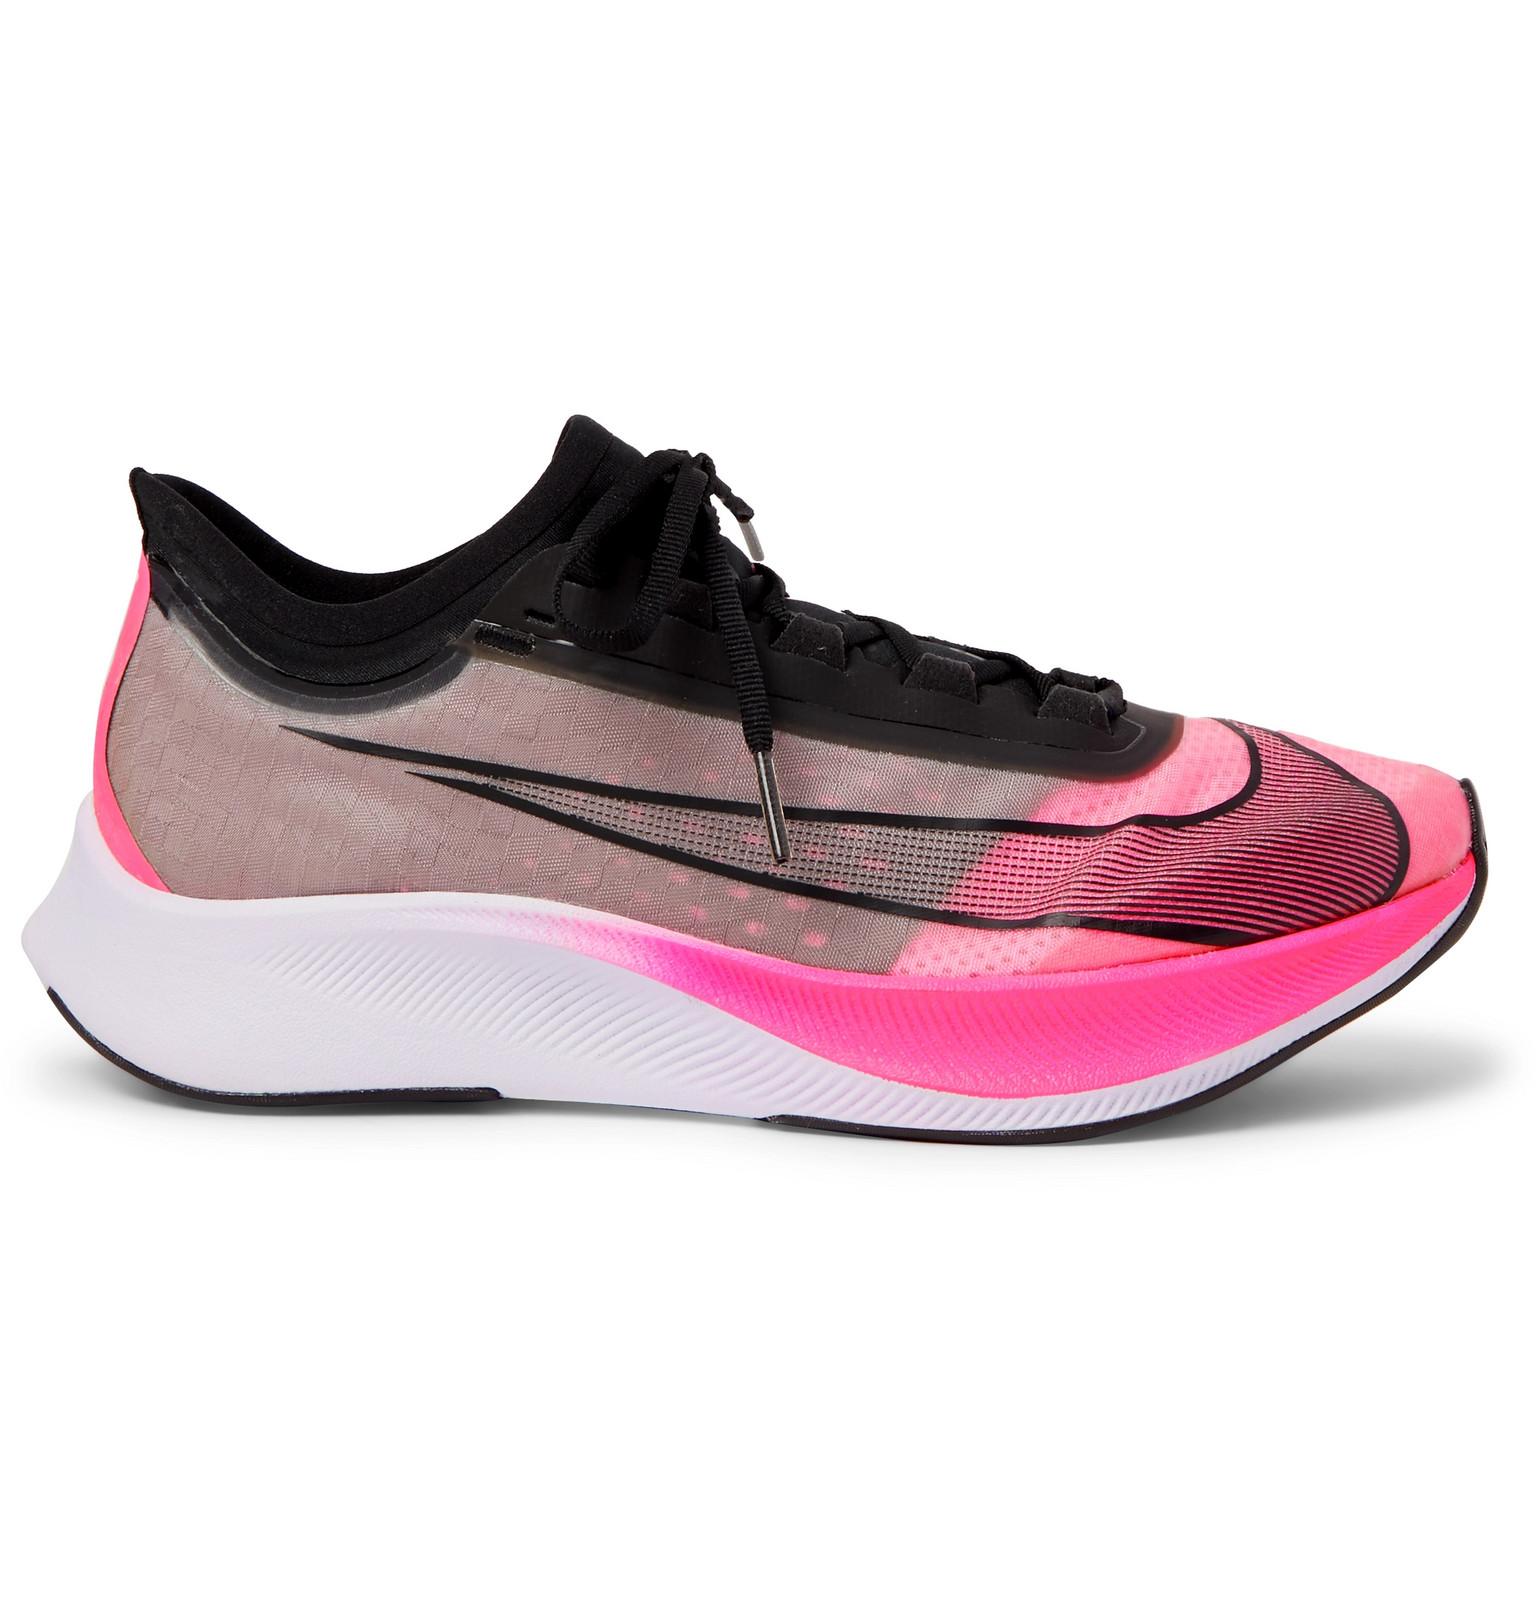 Nike Zoom Fly 3 Running Shoe in Pink for Men - Save 58% - Lyst